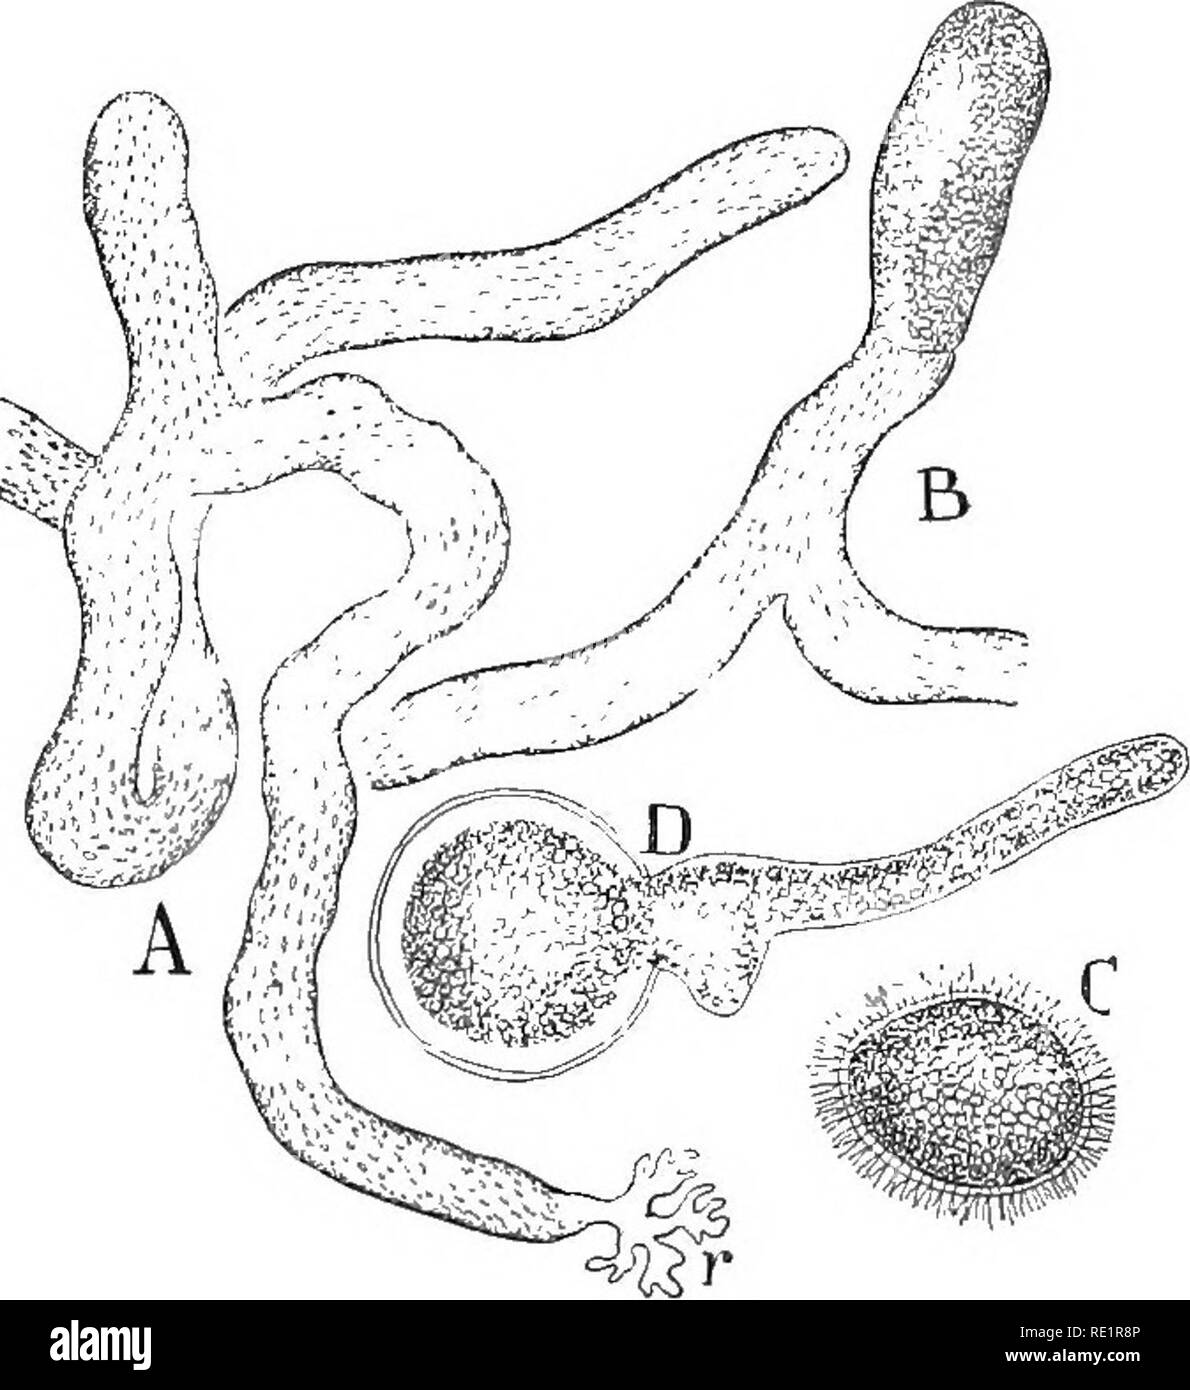 . Nature and development of plants. Botany. DEVELOPMENT OF PLANTS 195 70. Order d. Siphonales or Tubular Green Algae.—This order includes a large number of odd forms that are filamentous in character and they differ from algae previously noted in that the filaments contain numerous nuclei, but with rare exceptions no cell partitions. Such plants are called coenocytes. They assume various forms and often resemble a small plant with stem, root and leaf, but in all these cases the plant is essentially a huge cell- or tube without partitions and containing numerous nuclei. Most of the Siphonales a Stock Photo